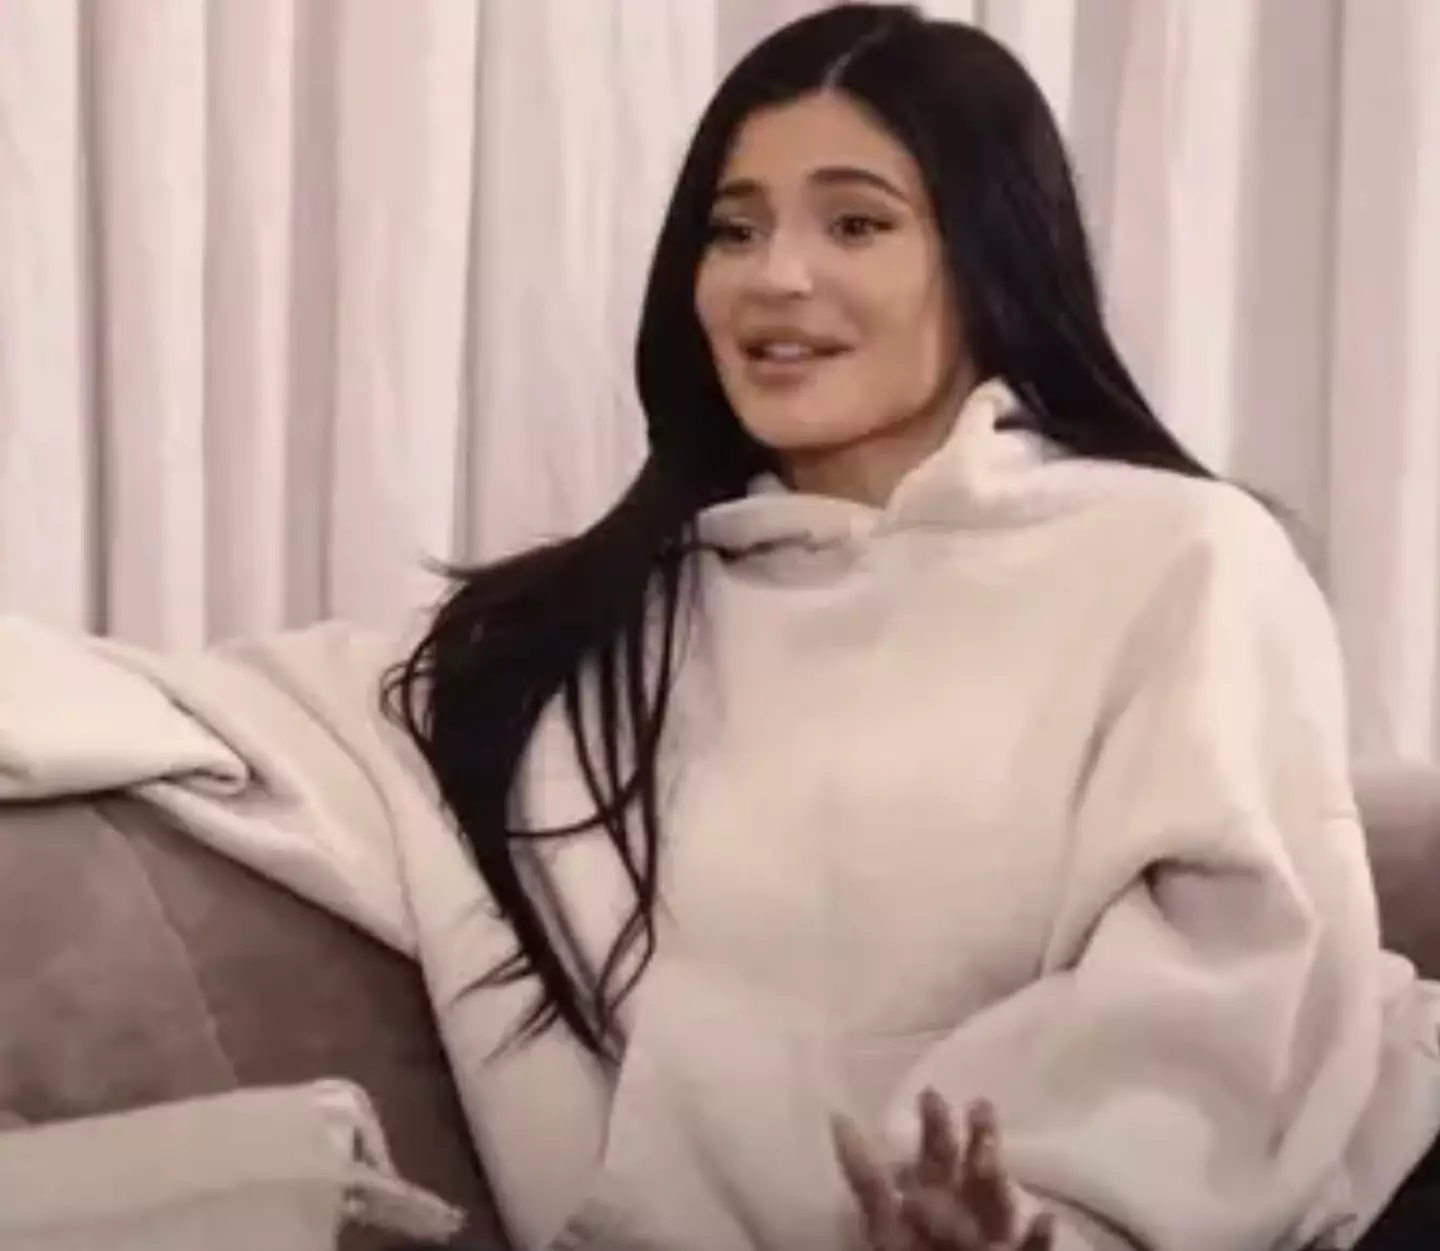 Kylie Jenner has questioned the beauty standards she and her family have set.